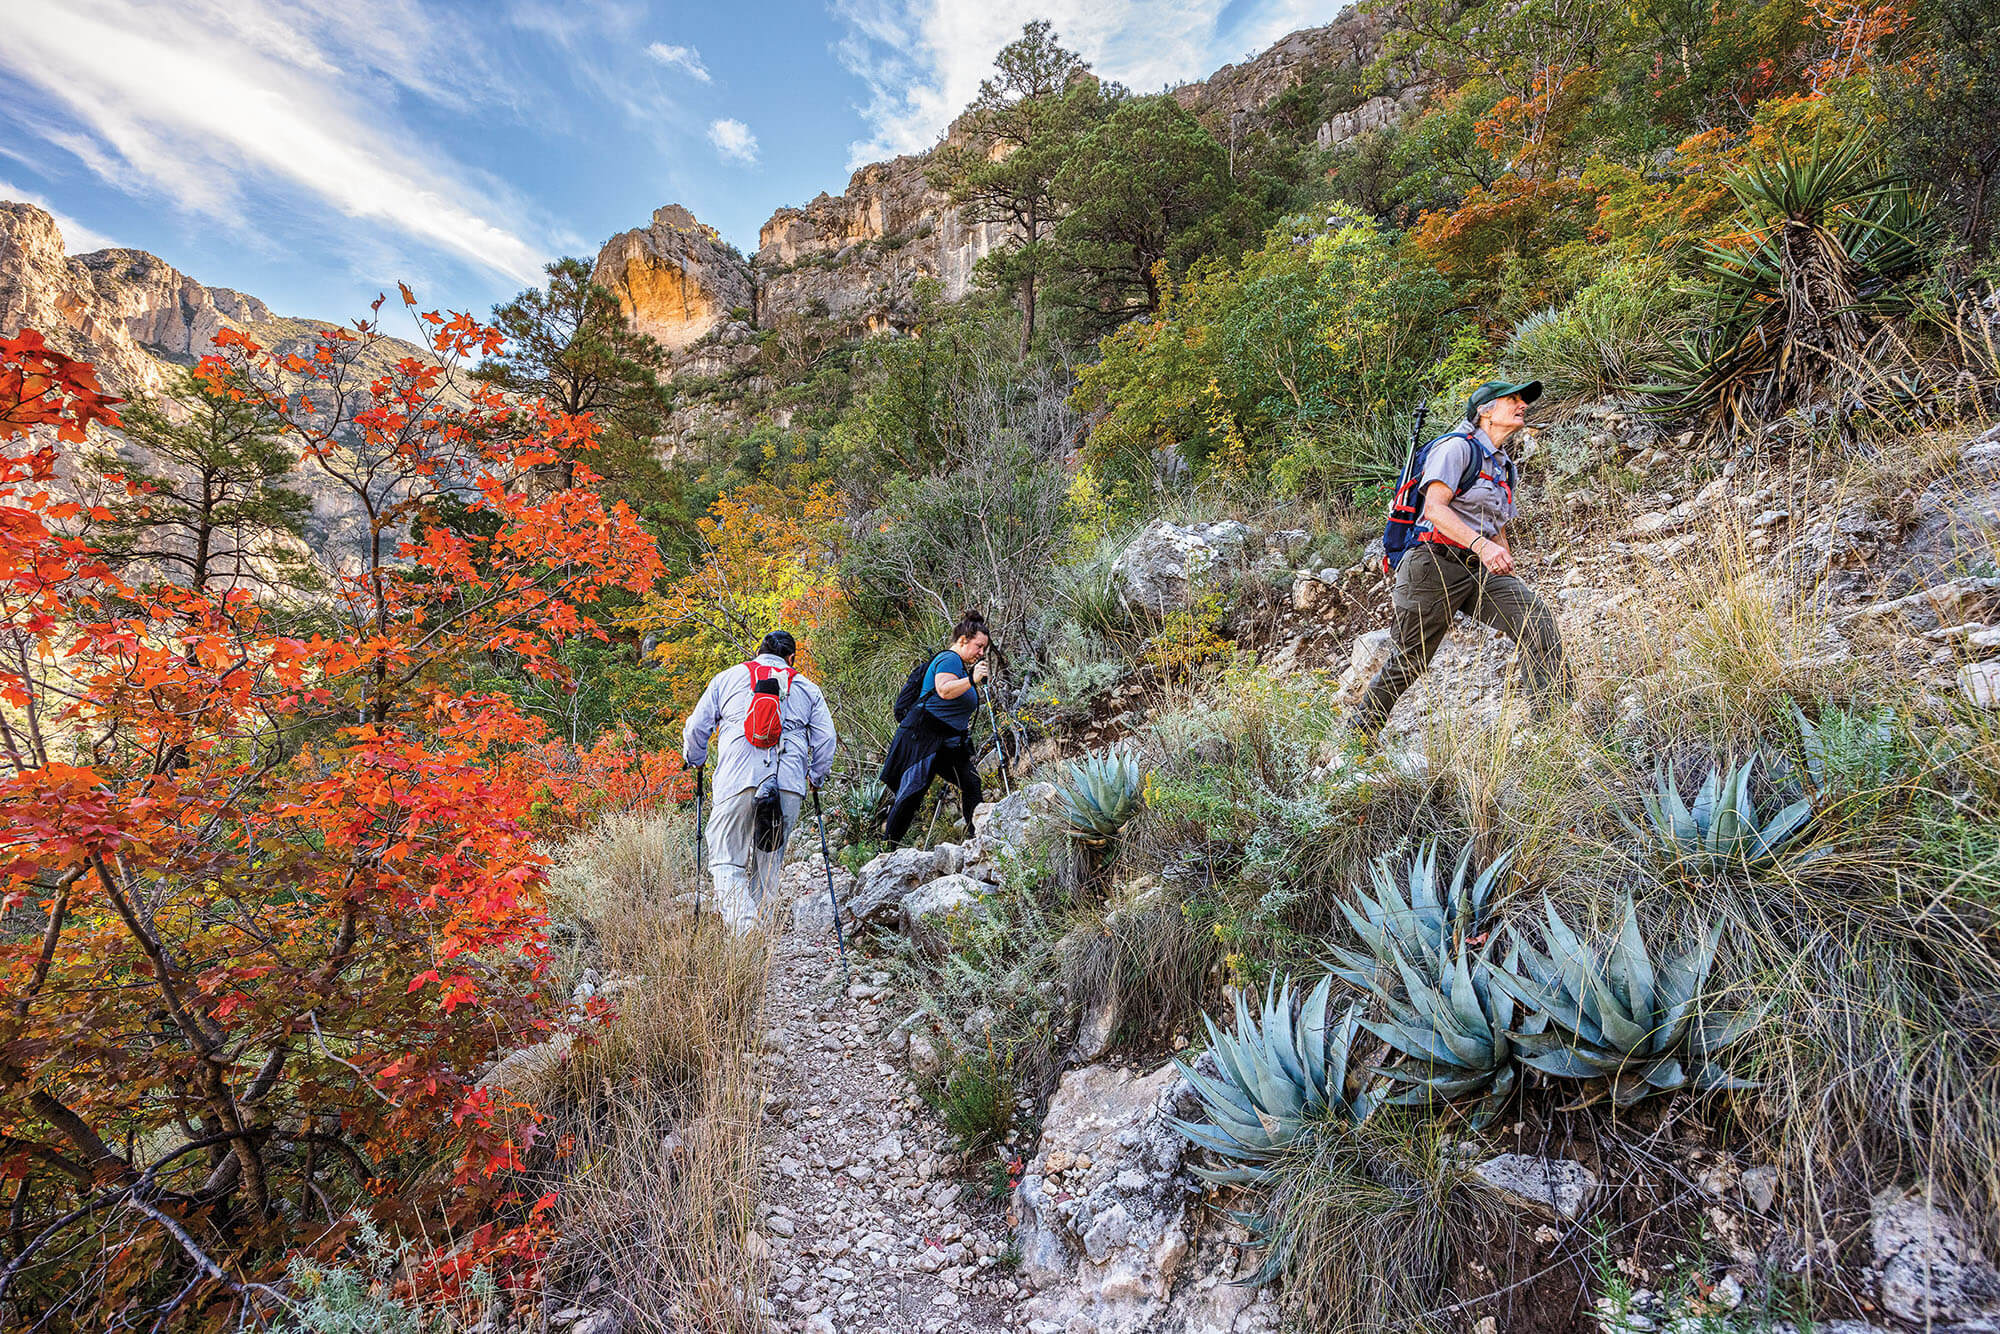 A group of people wearing backpacks hike along a gravel trail among cacti and bright orange trees